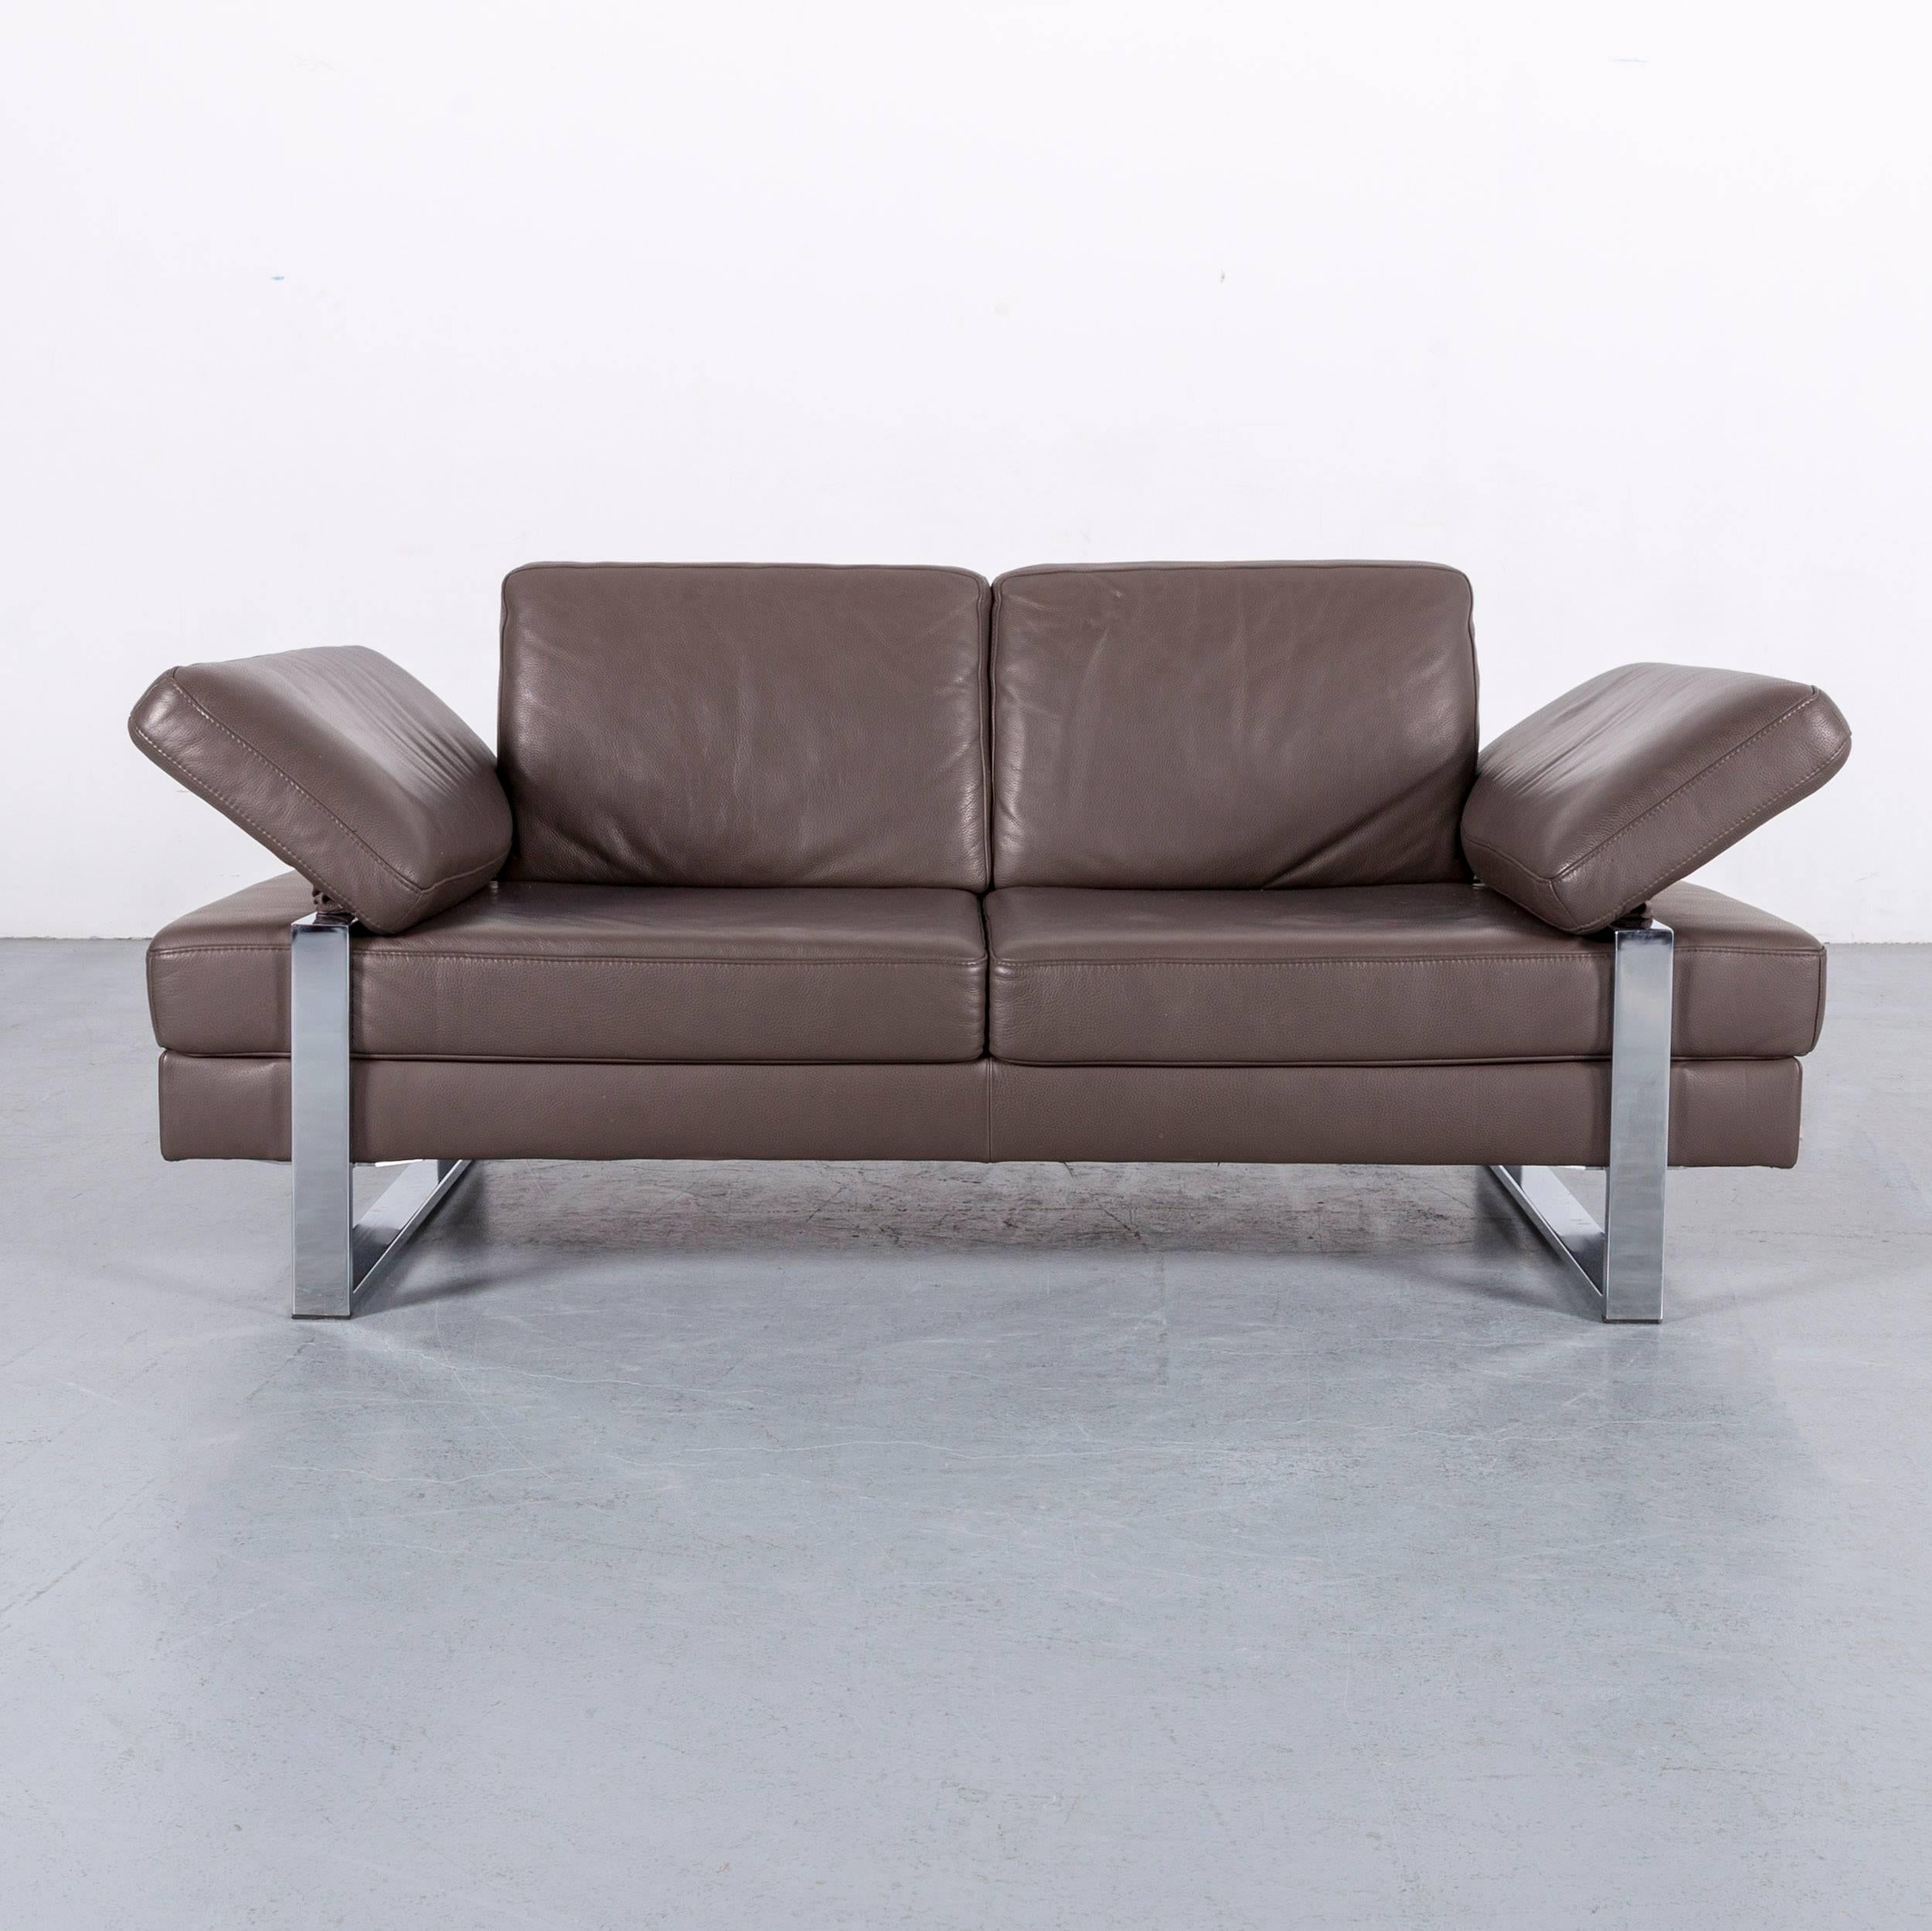 We bring to you an Ewald Schillig leather sofa brown two-seat.




























